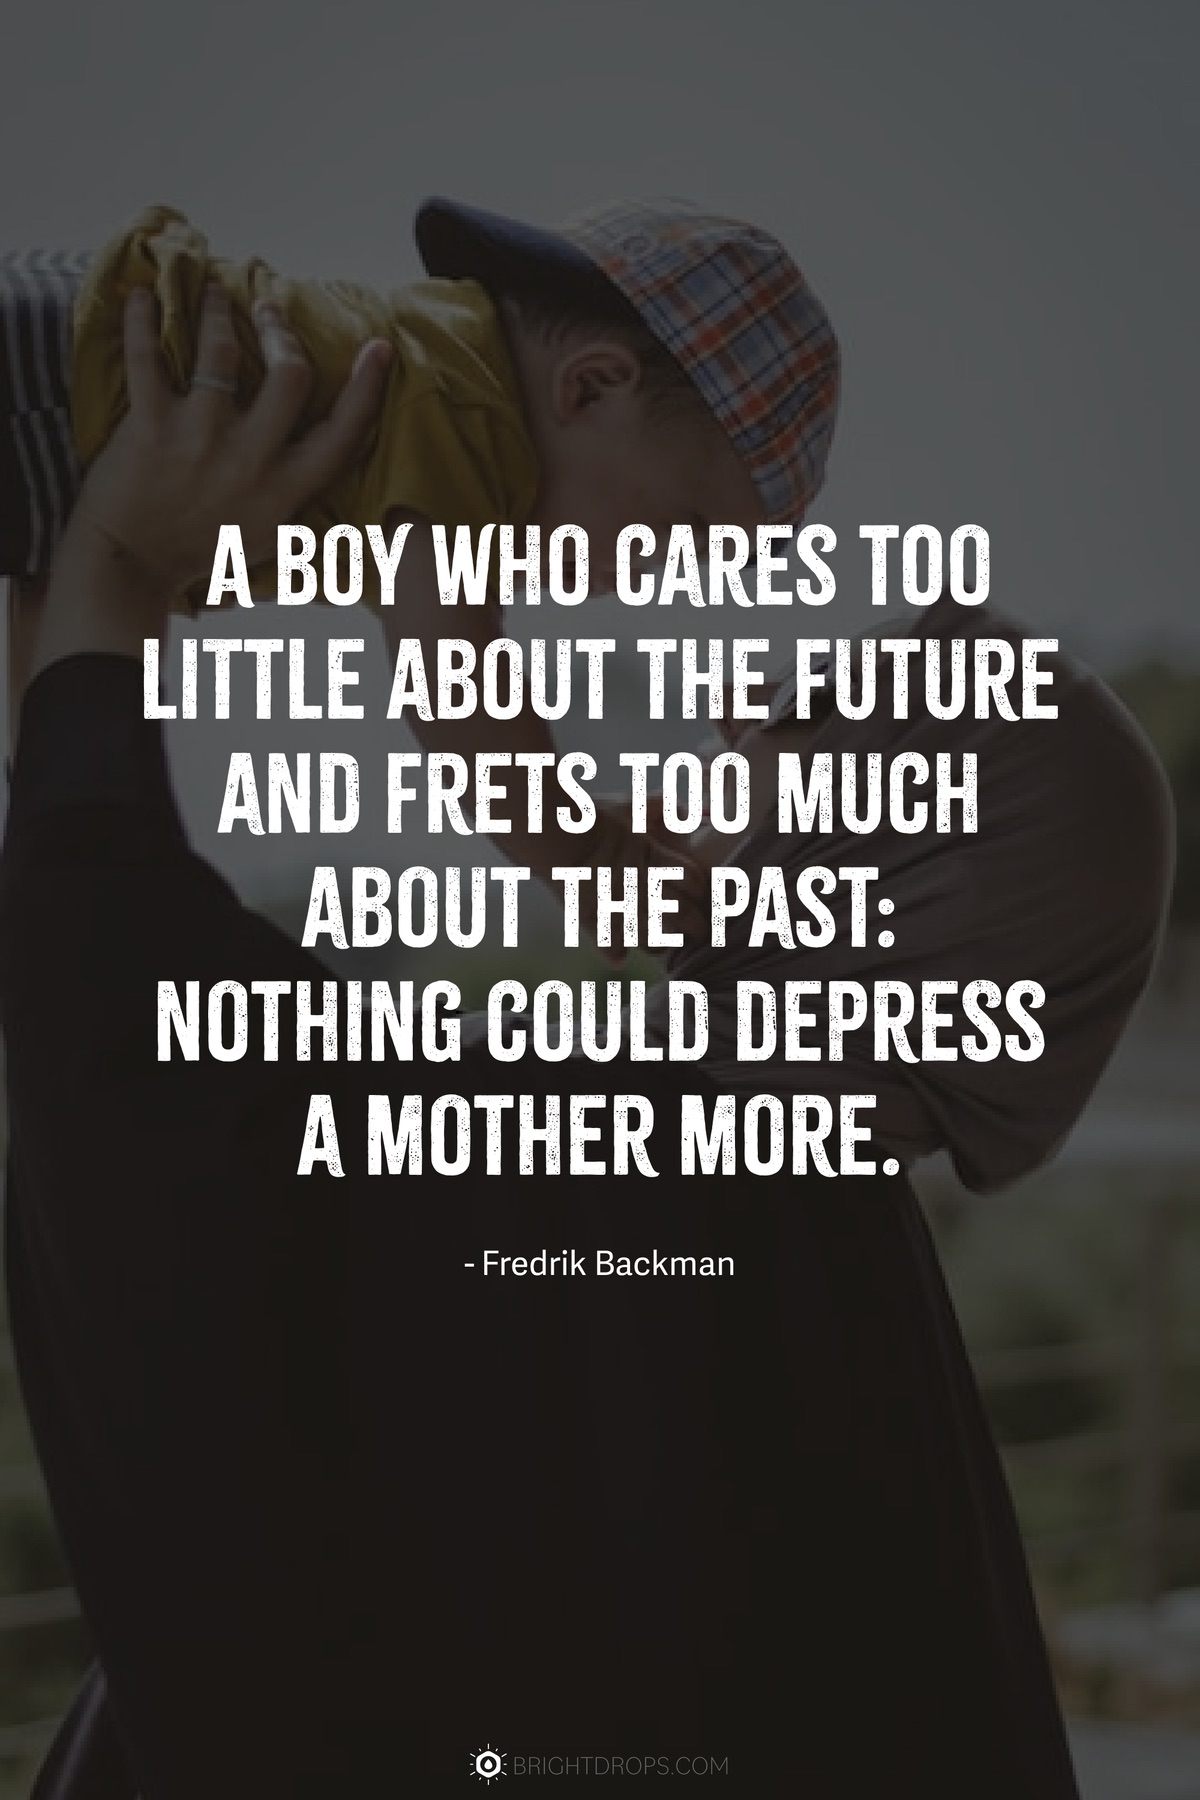 A boy who cares too little about the future and frets too much about the past: nothing could depress a mother more.